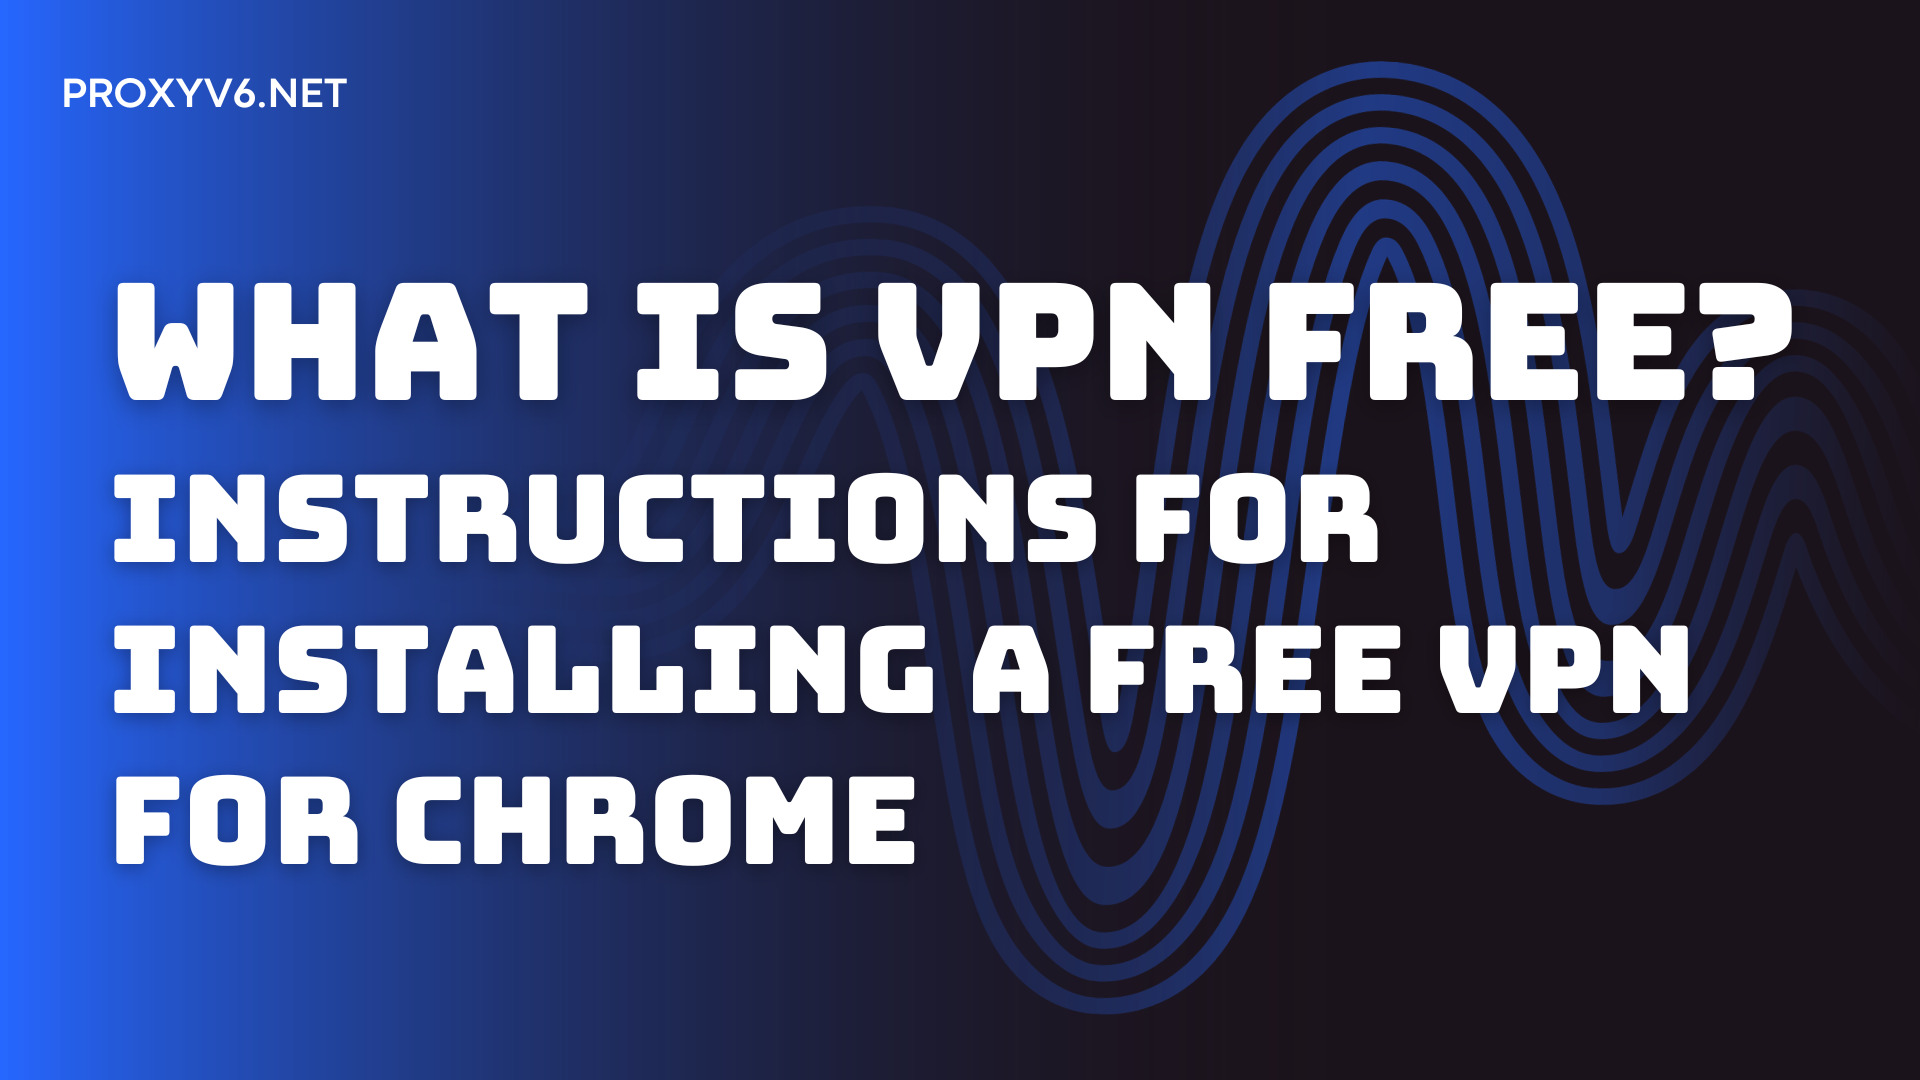 What is VPN Free? Instructions for installing a free VPN for Chrome